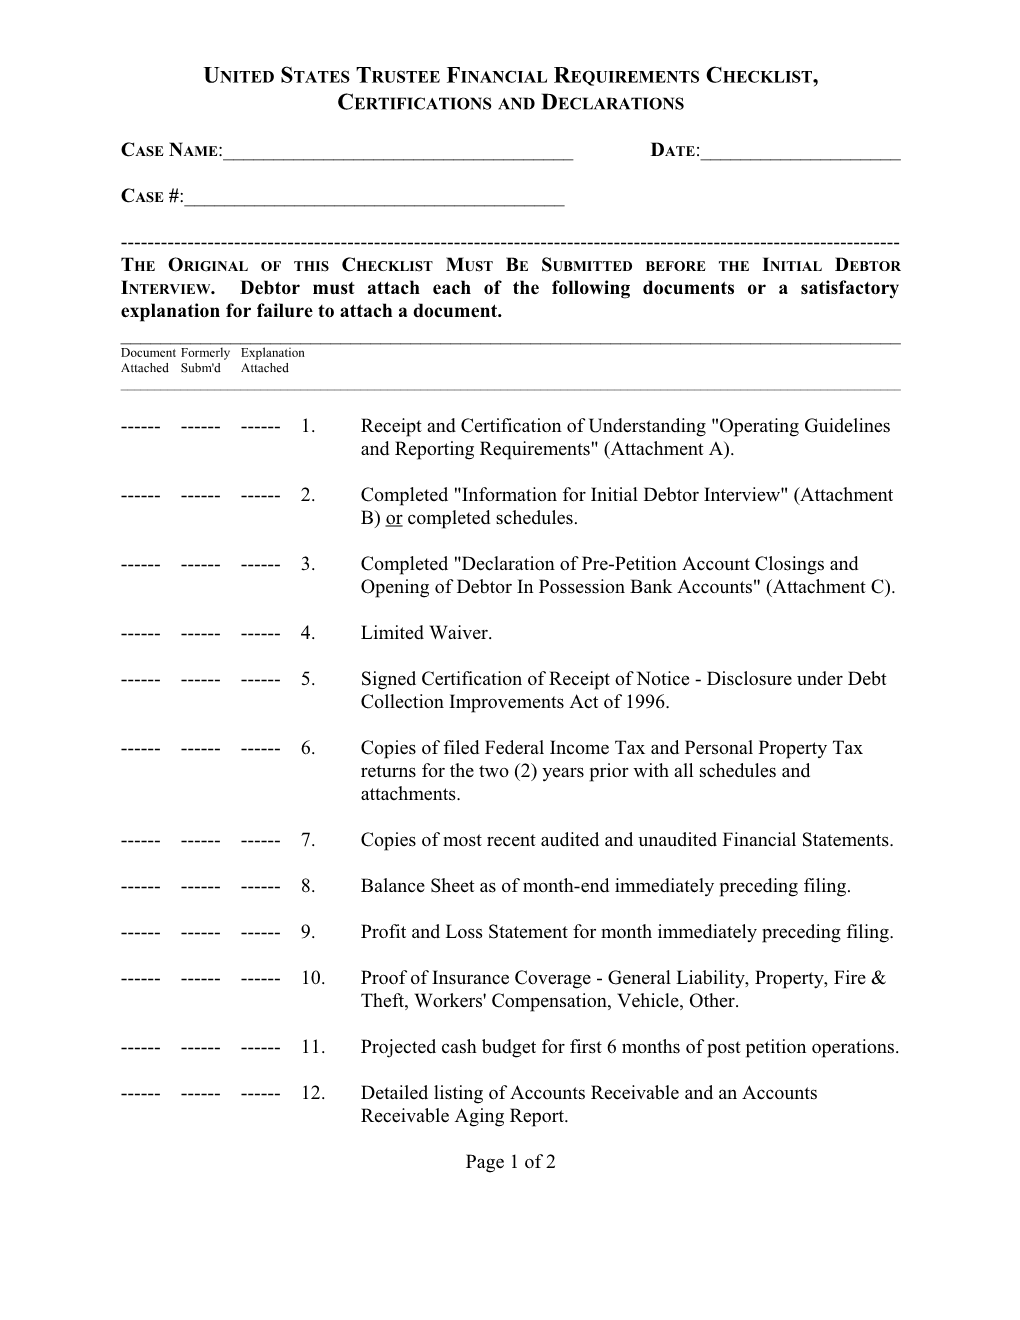 United States Trustee Financial Requirements Checklist